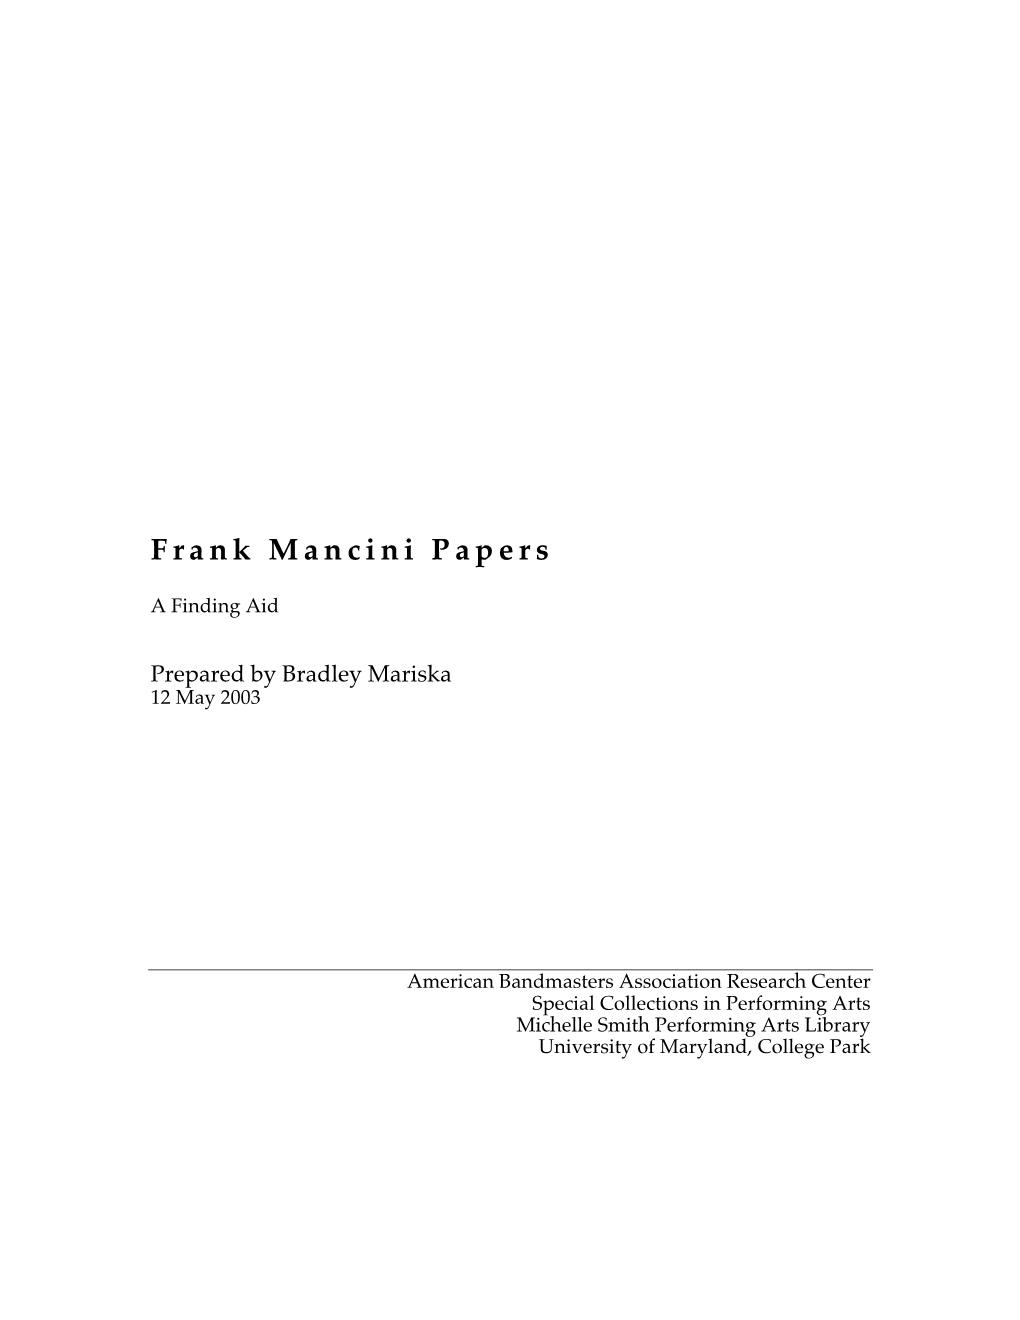 Frank Mancini Papers